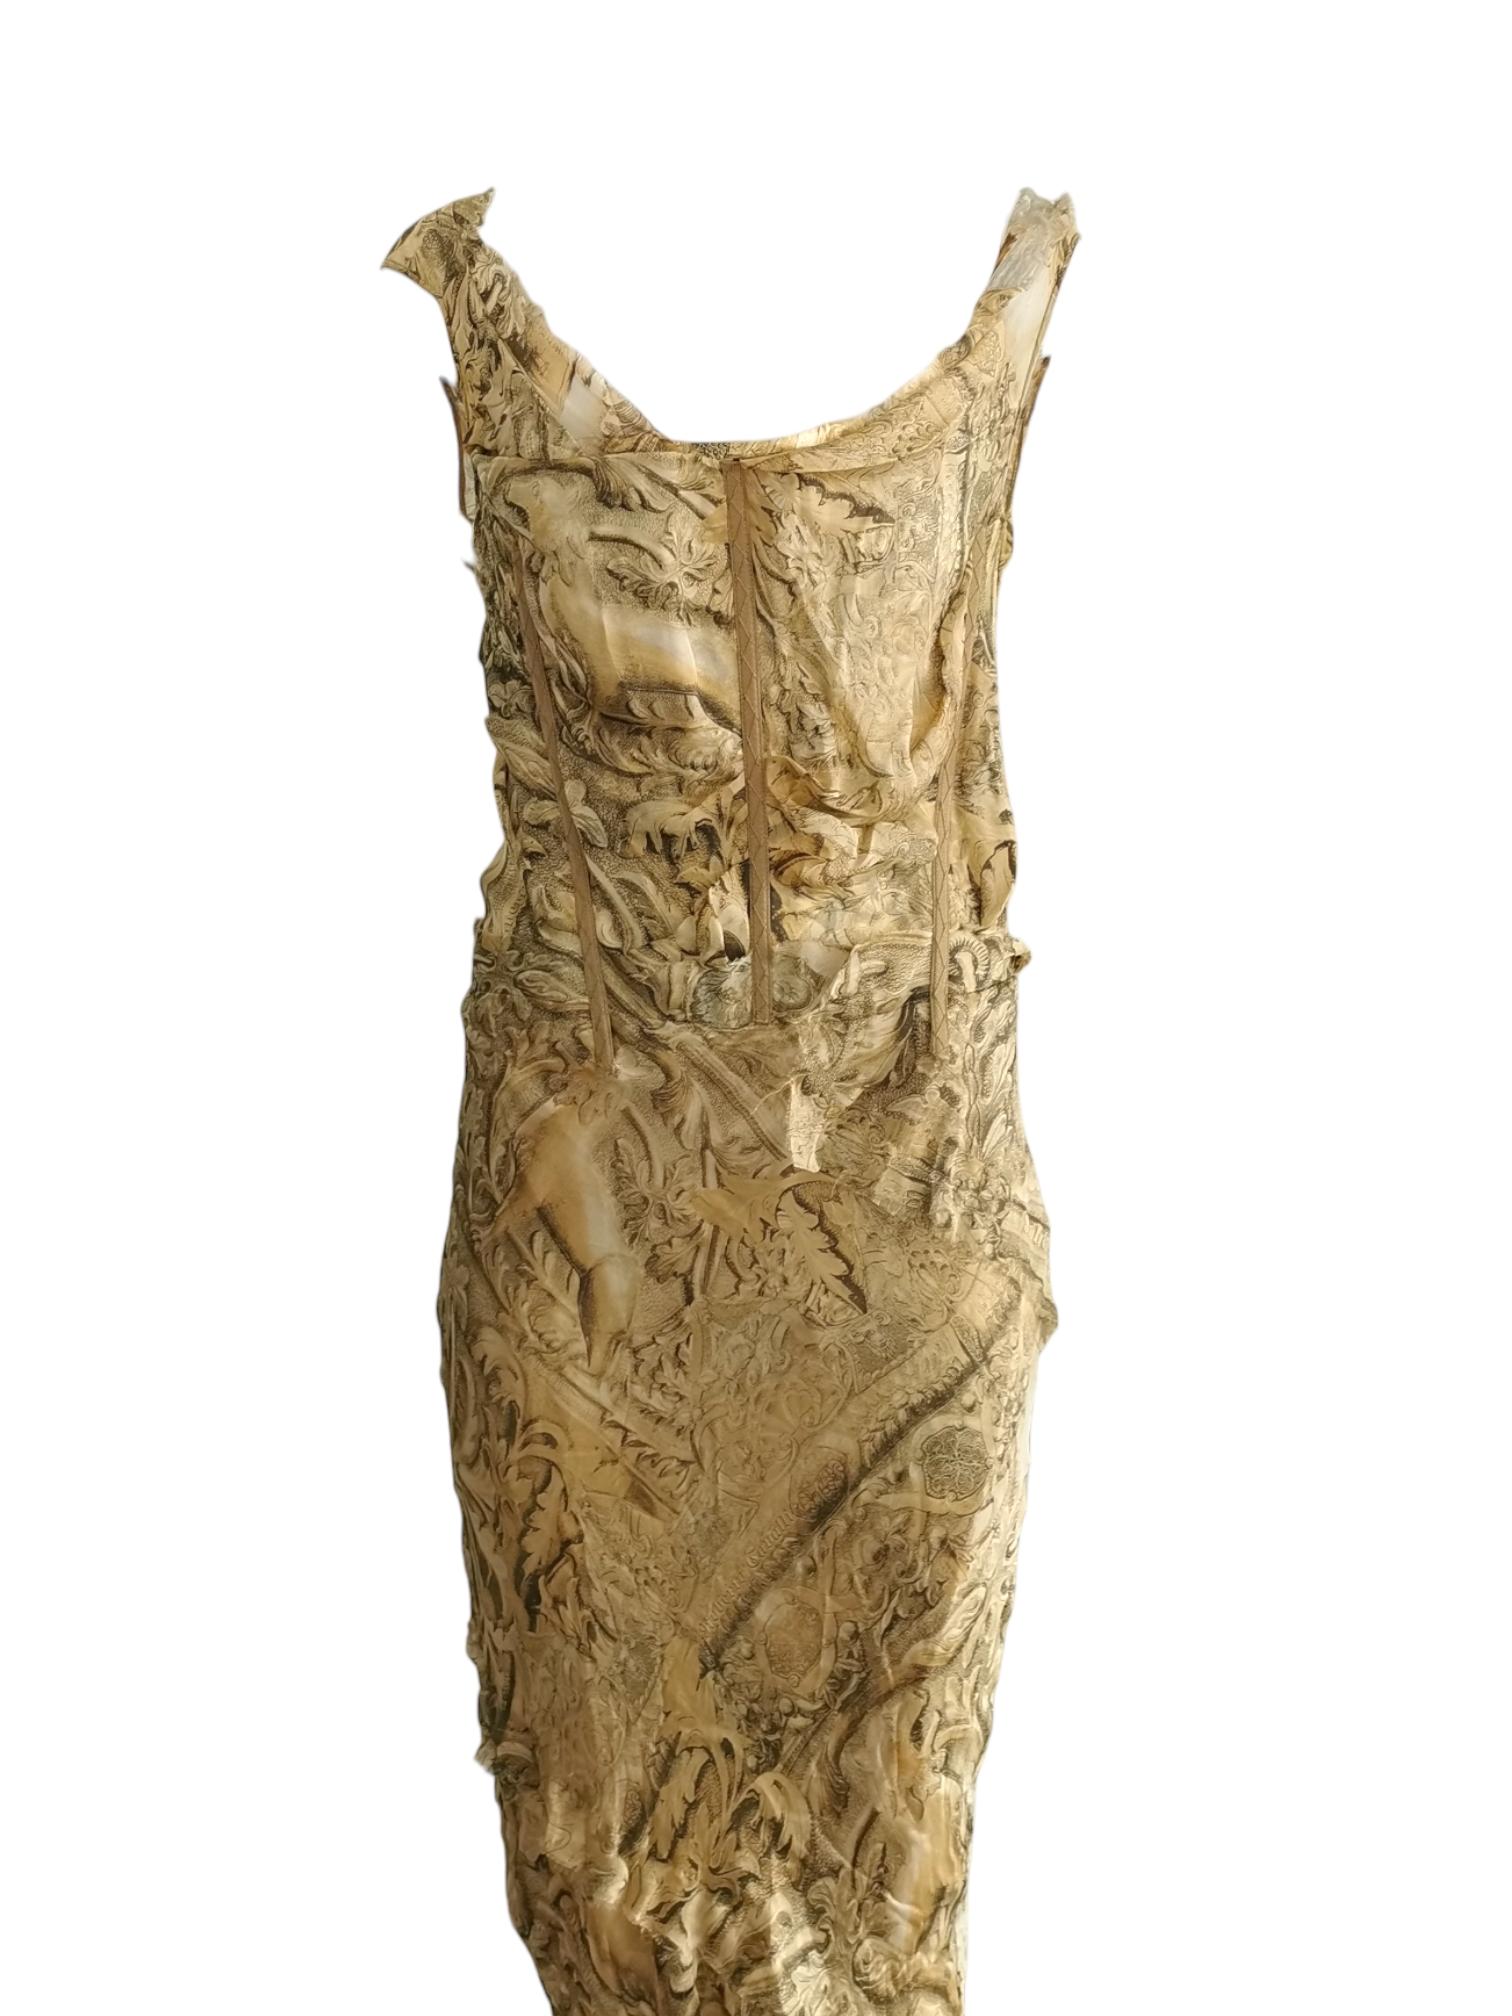 My Runway Archive presents a gold corseted runway gown from the Roberto Cavalli FW 2001 collection. 
Material: Silk
Size: Size label is missing but fits like a UK 12. Measurements taken upon request.
Condition: Good the material is supposed to have